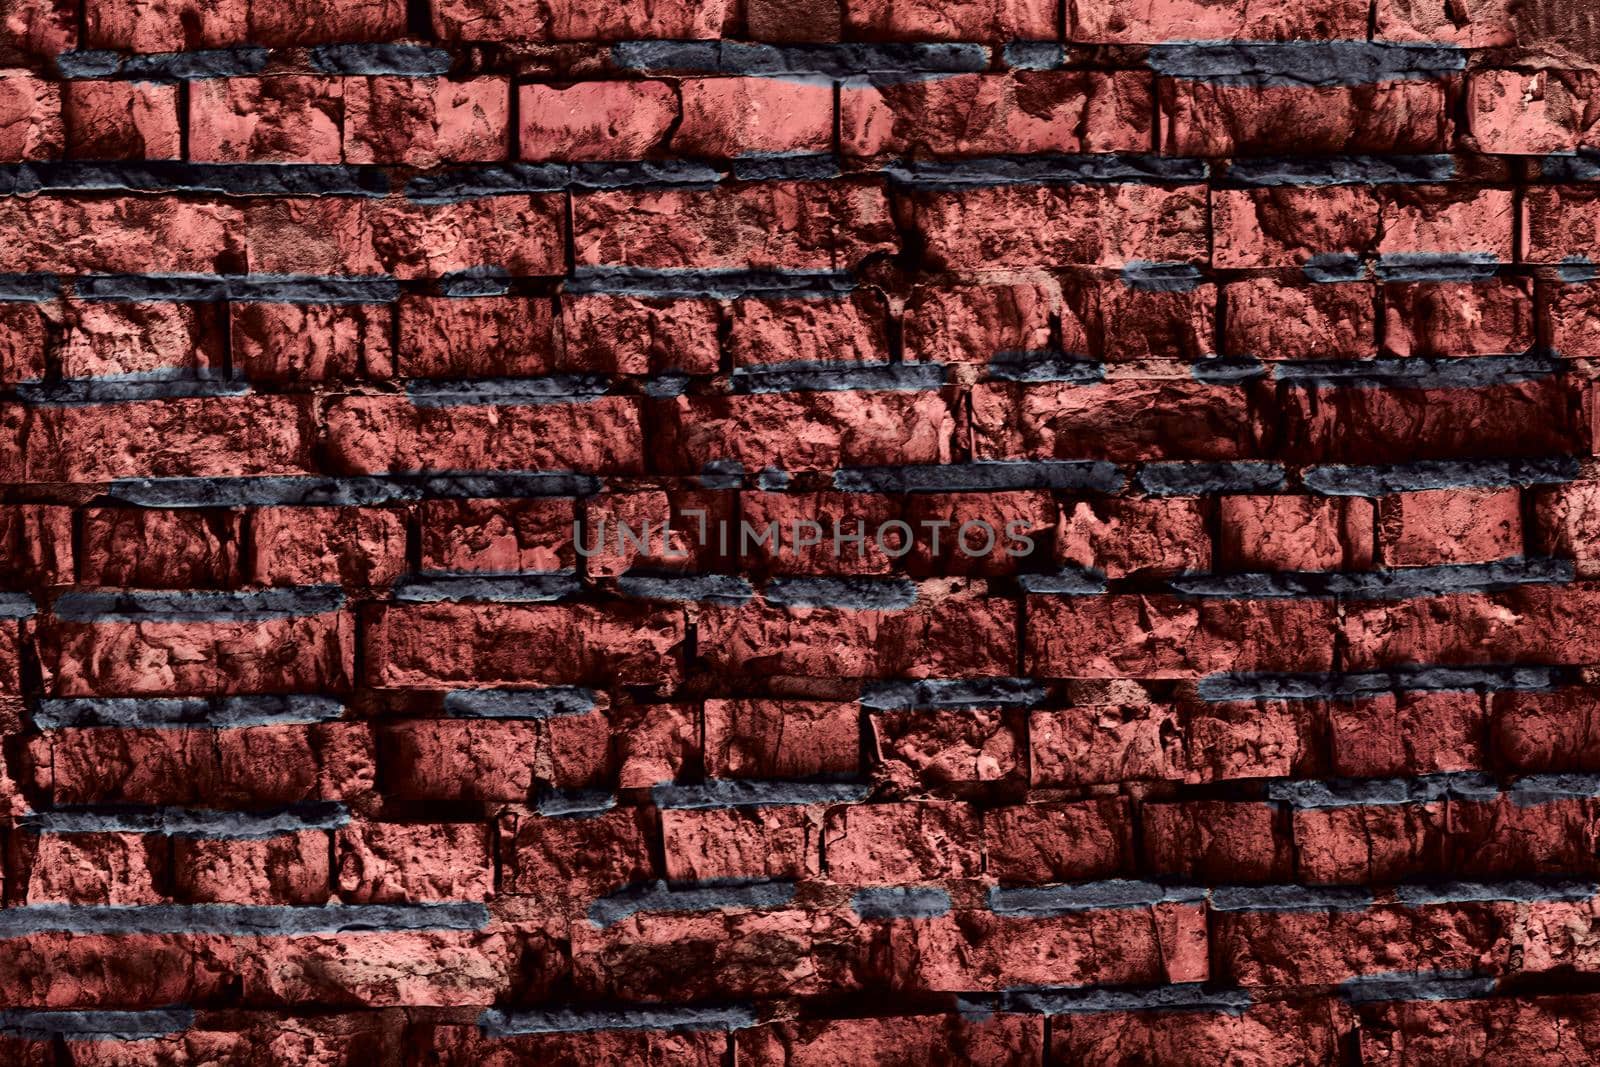 a small rectangular block typically made of fired or sun-dried clay, used in building. Big mate full background of detailed old red brick wall